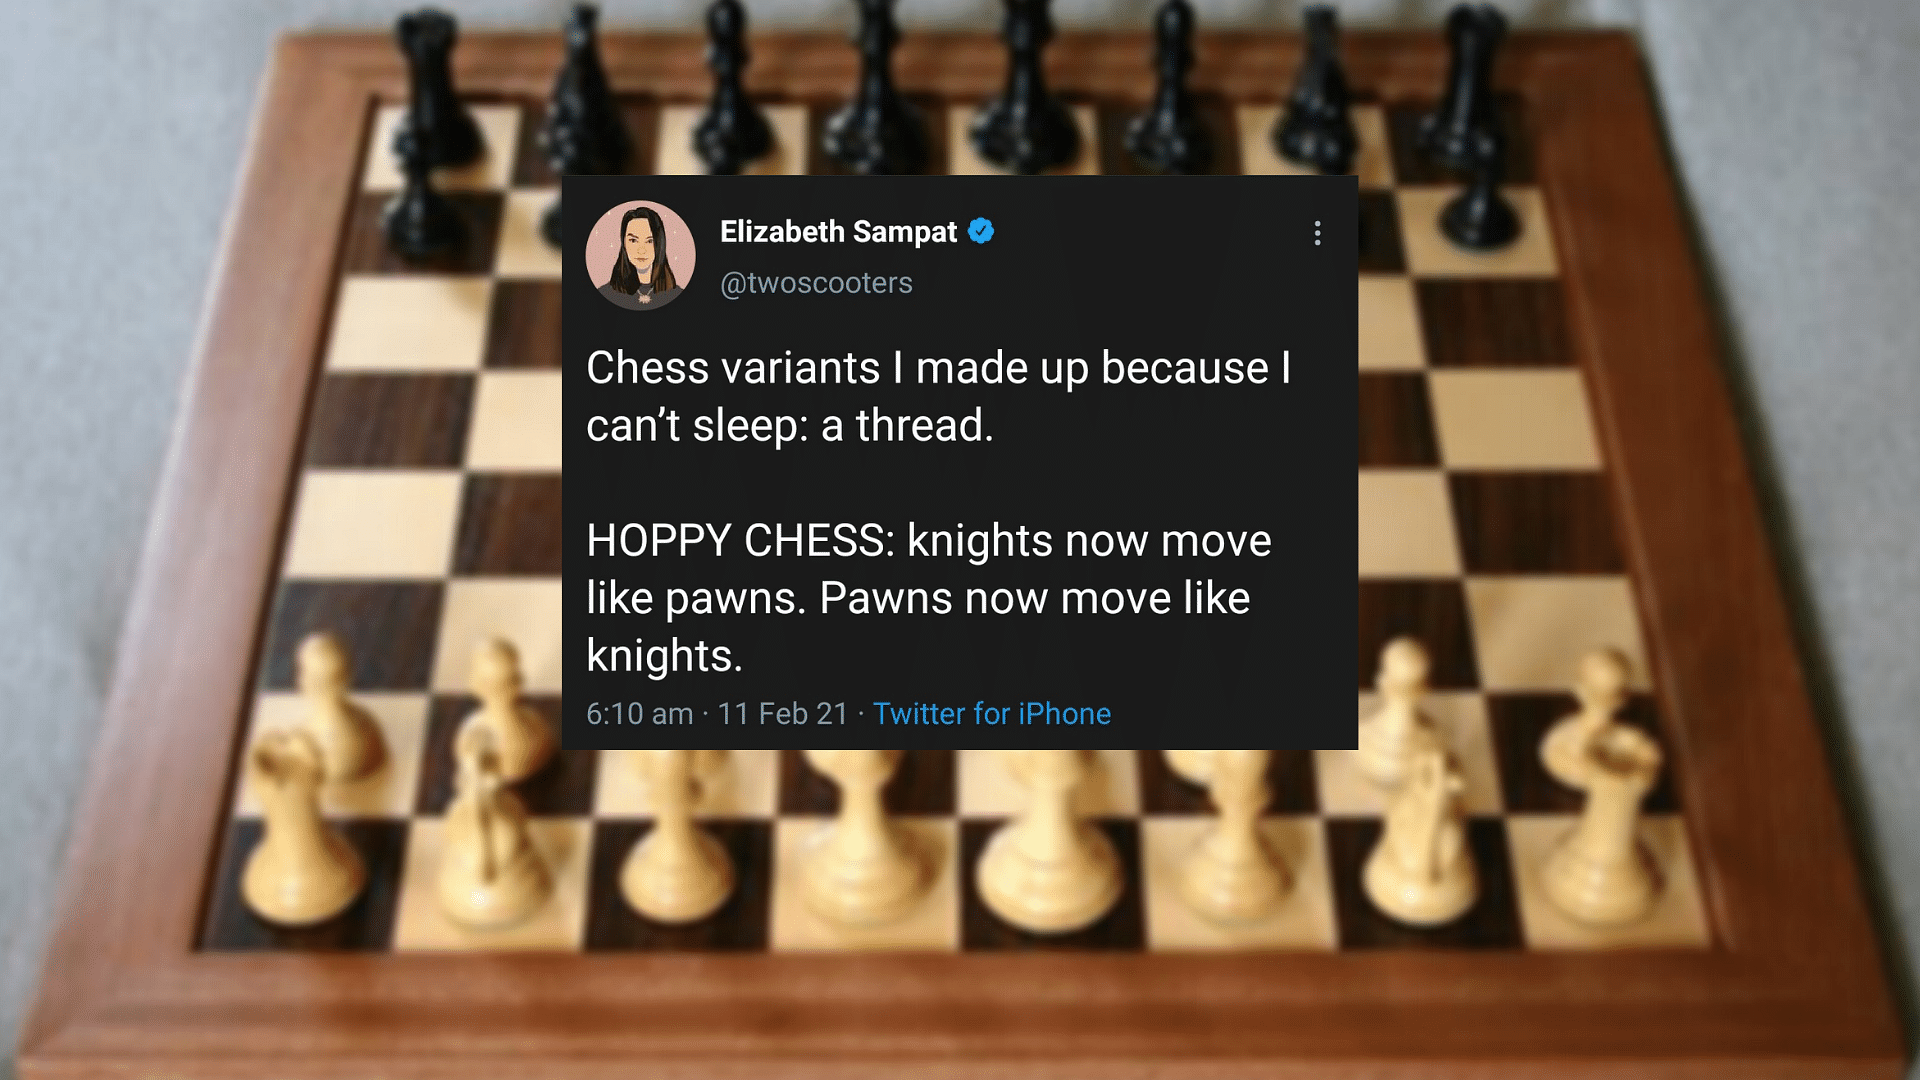 Sleepless game designer comes up with many chess variants